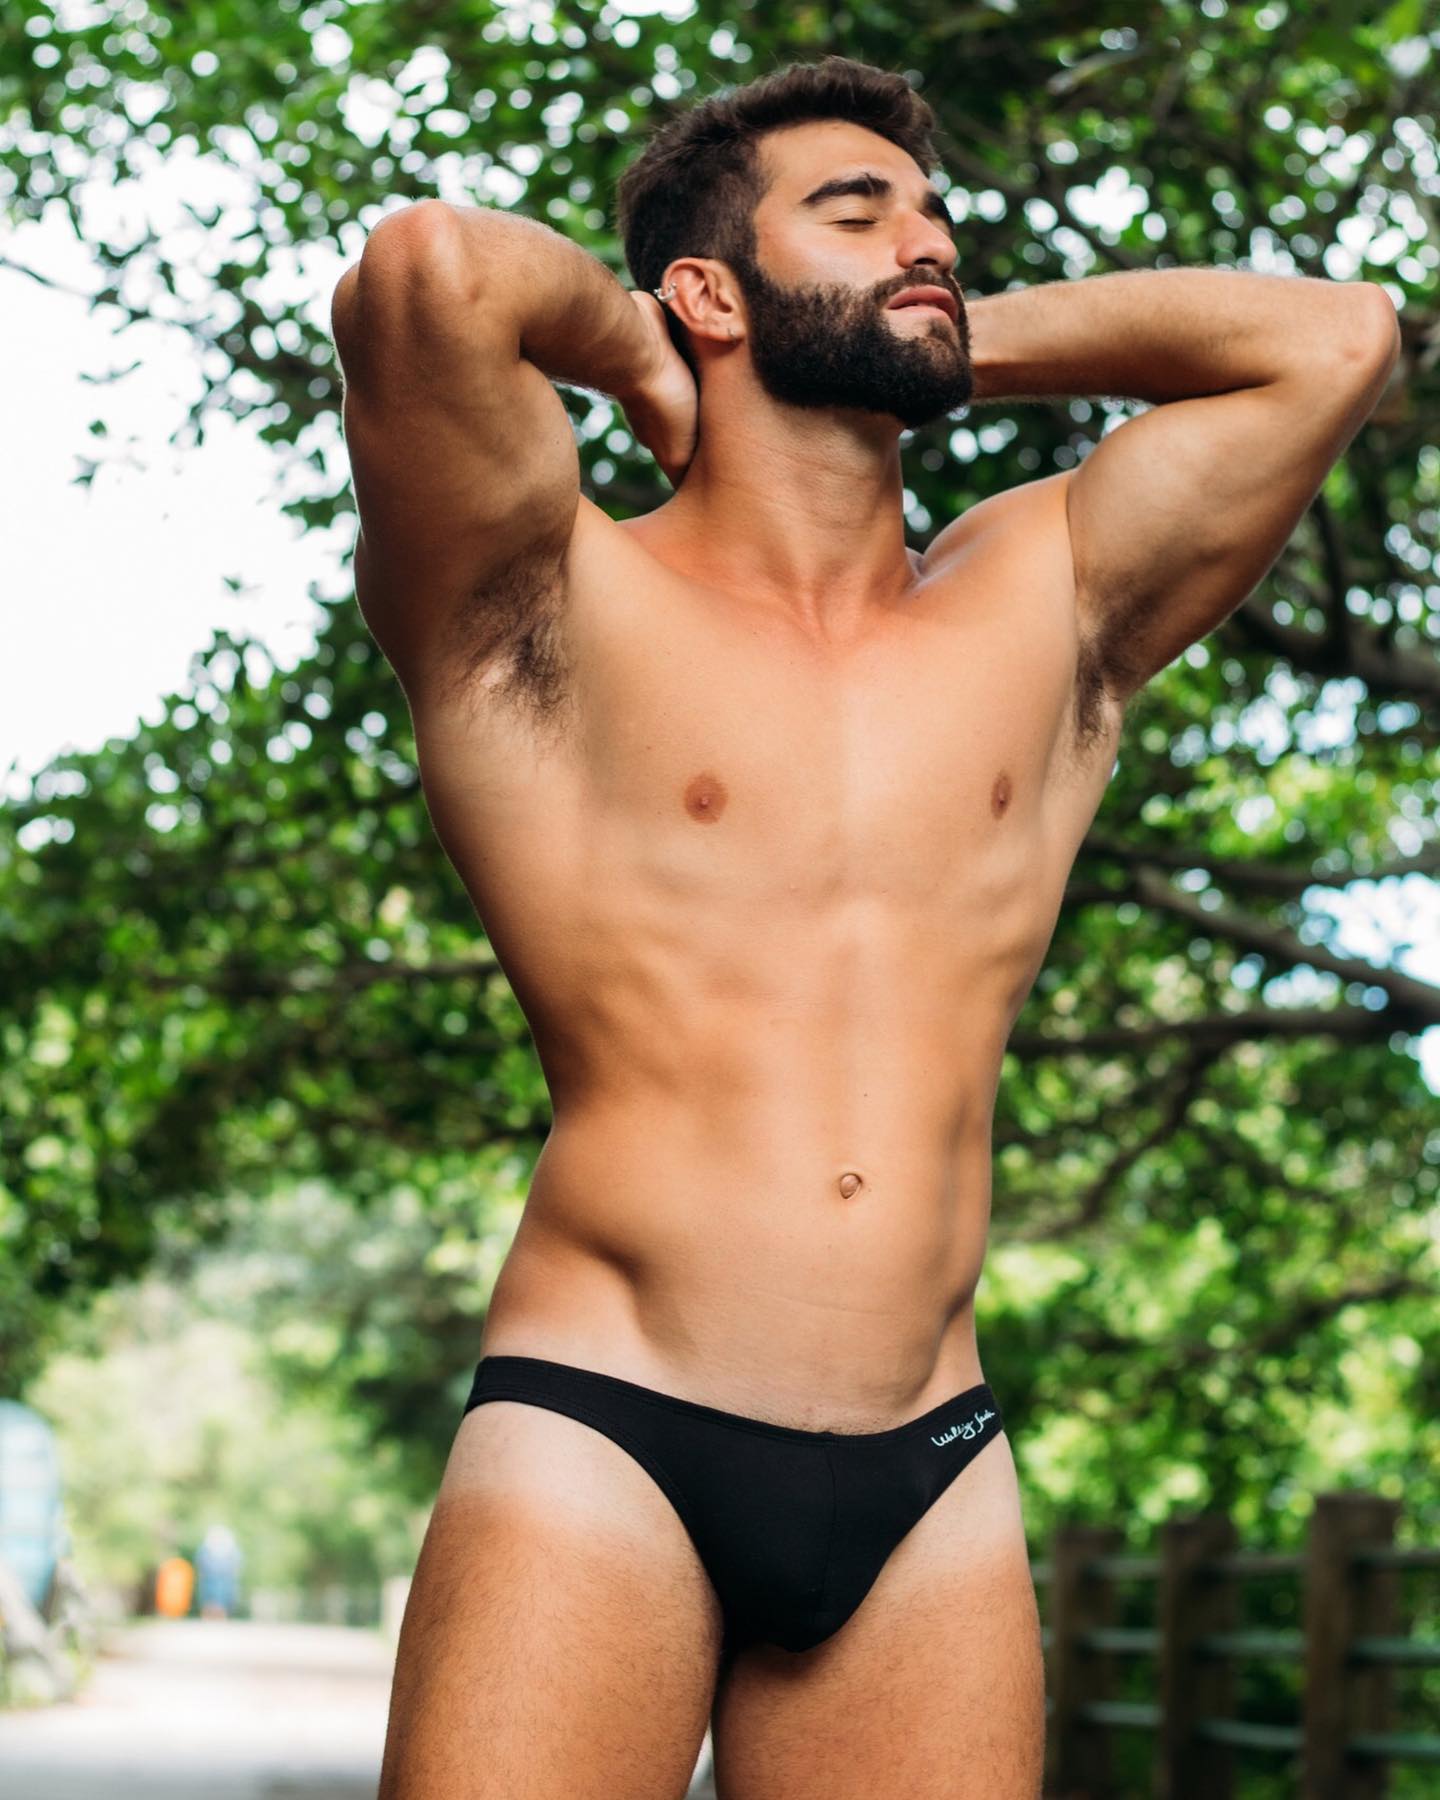 The Micro Briefs in black by Walking Jack are back in stock! Check out these super low-rise, organic cotton made bikini briefs:
_____
menandunderwear.com/shop